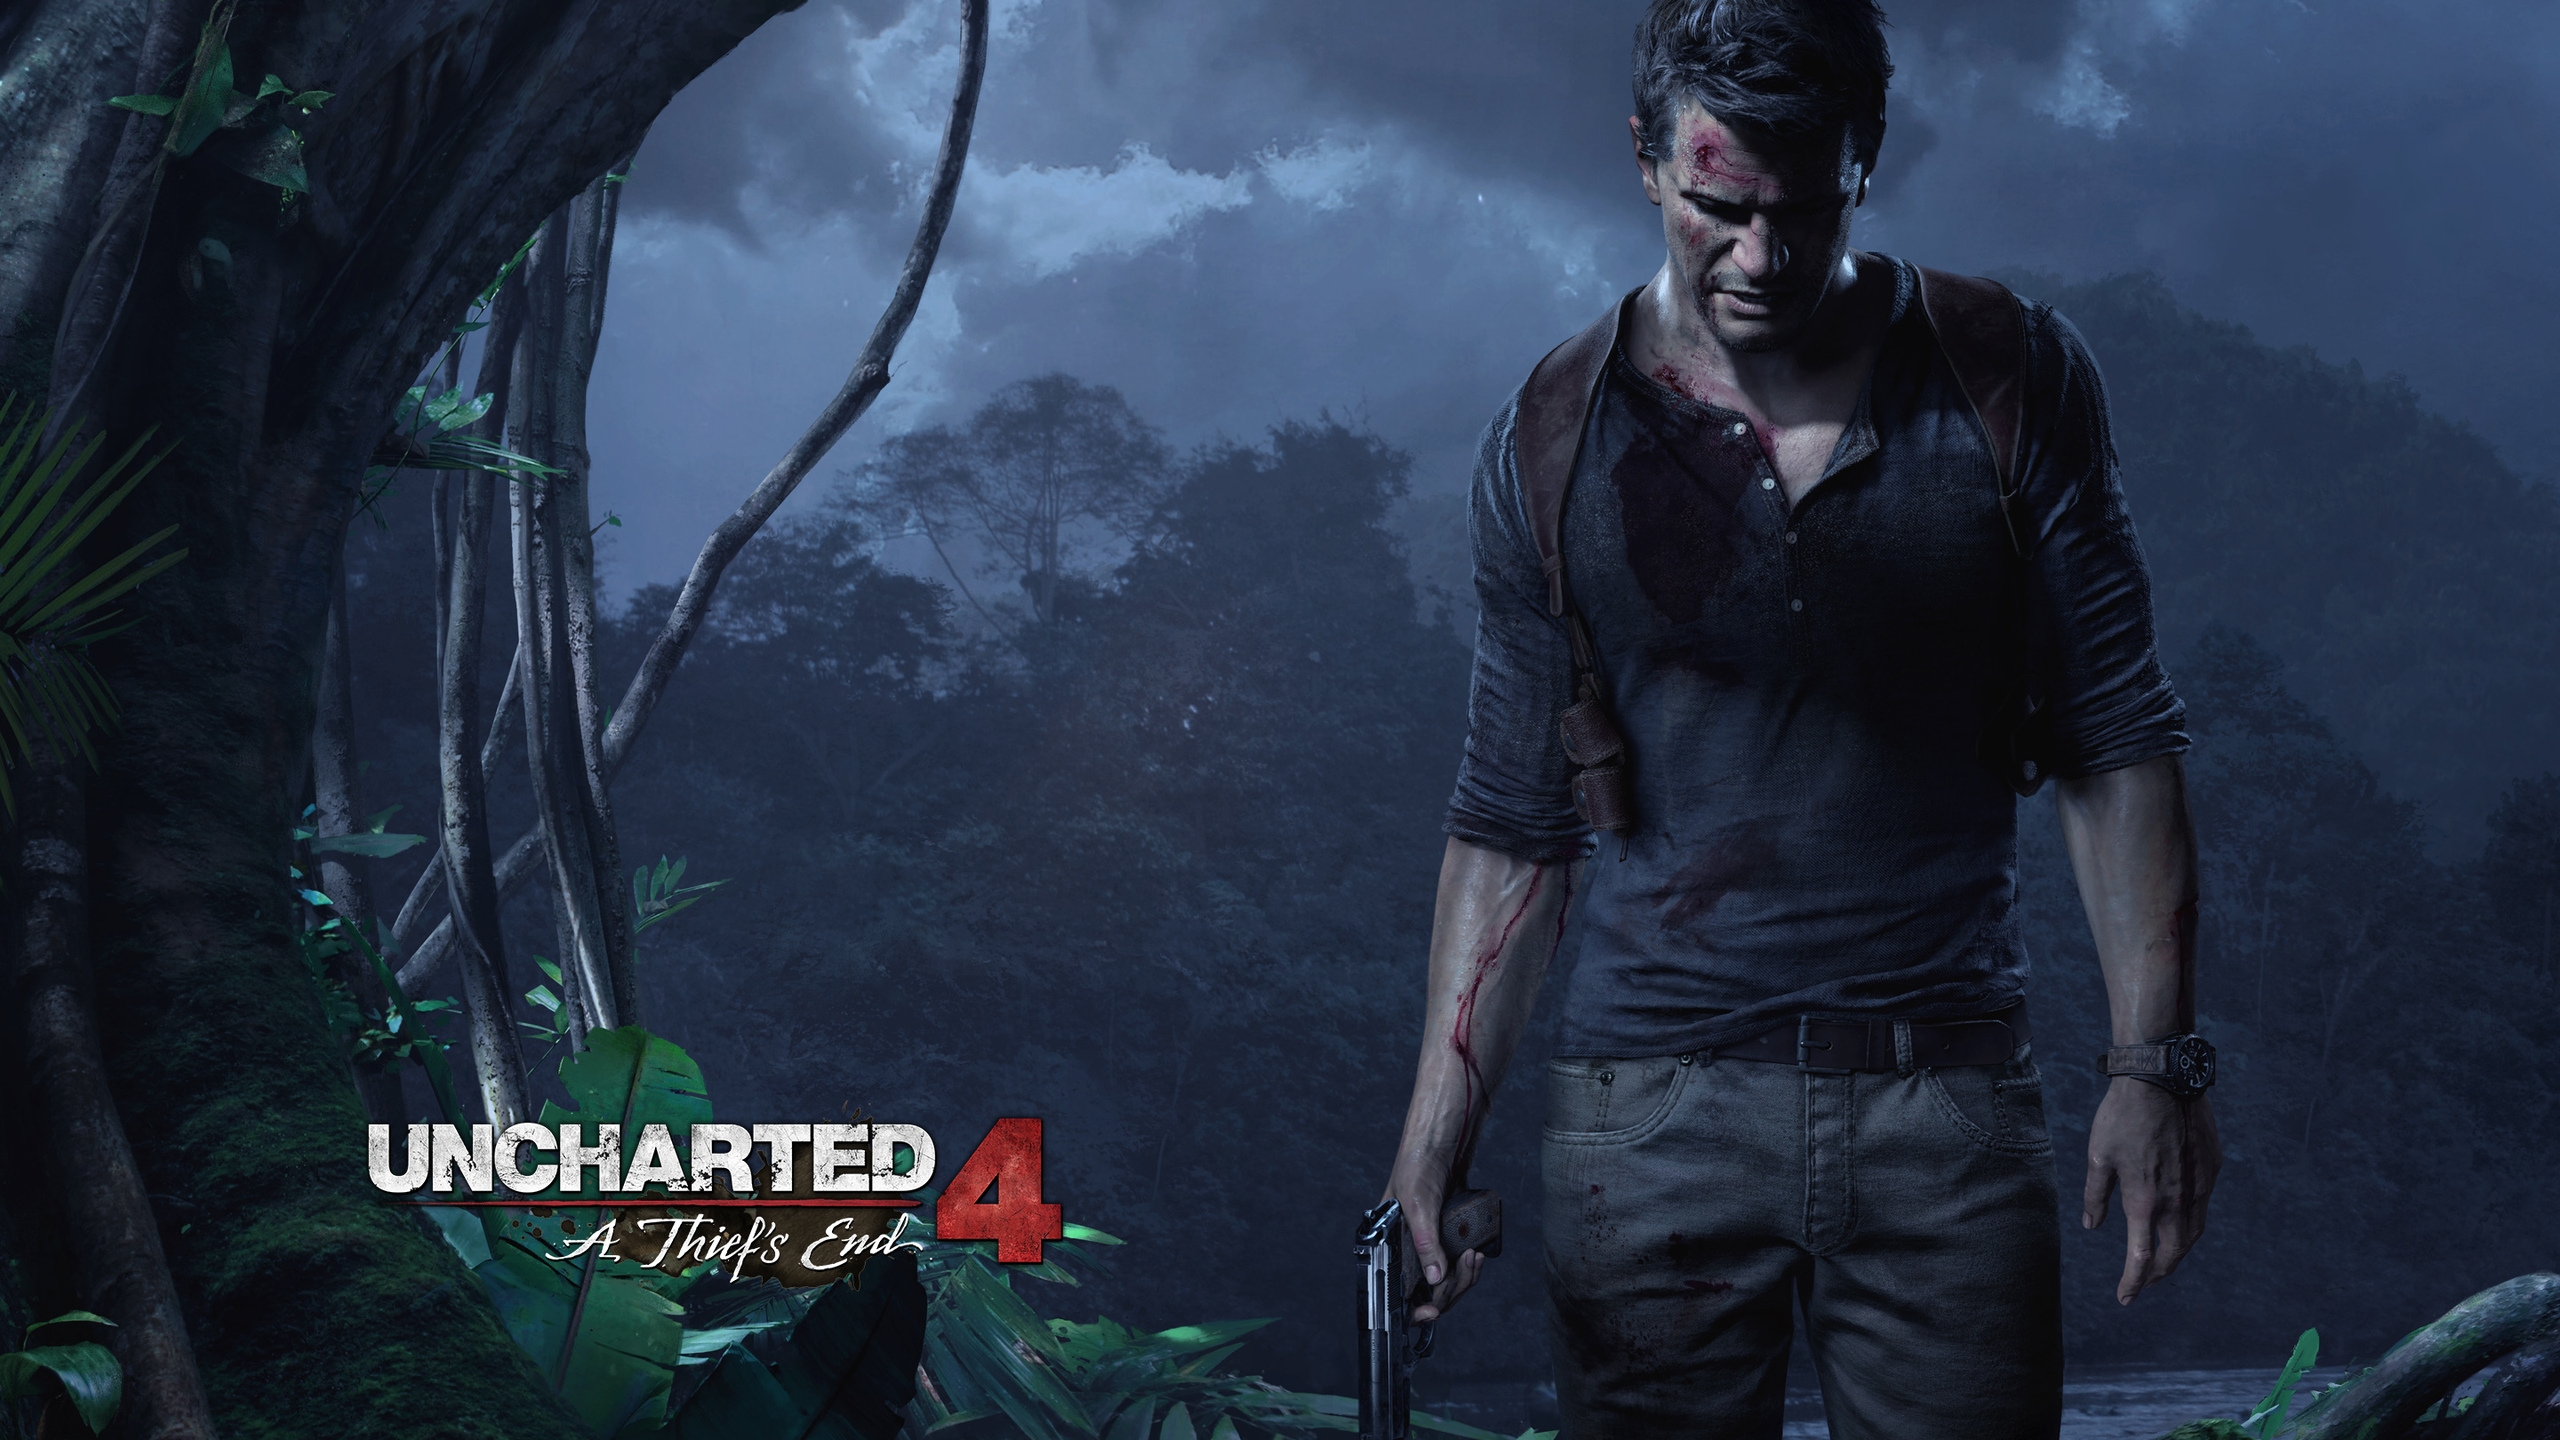 Uncharted 4 for 2560x1440 HDTV resolution